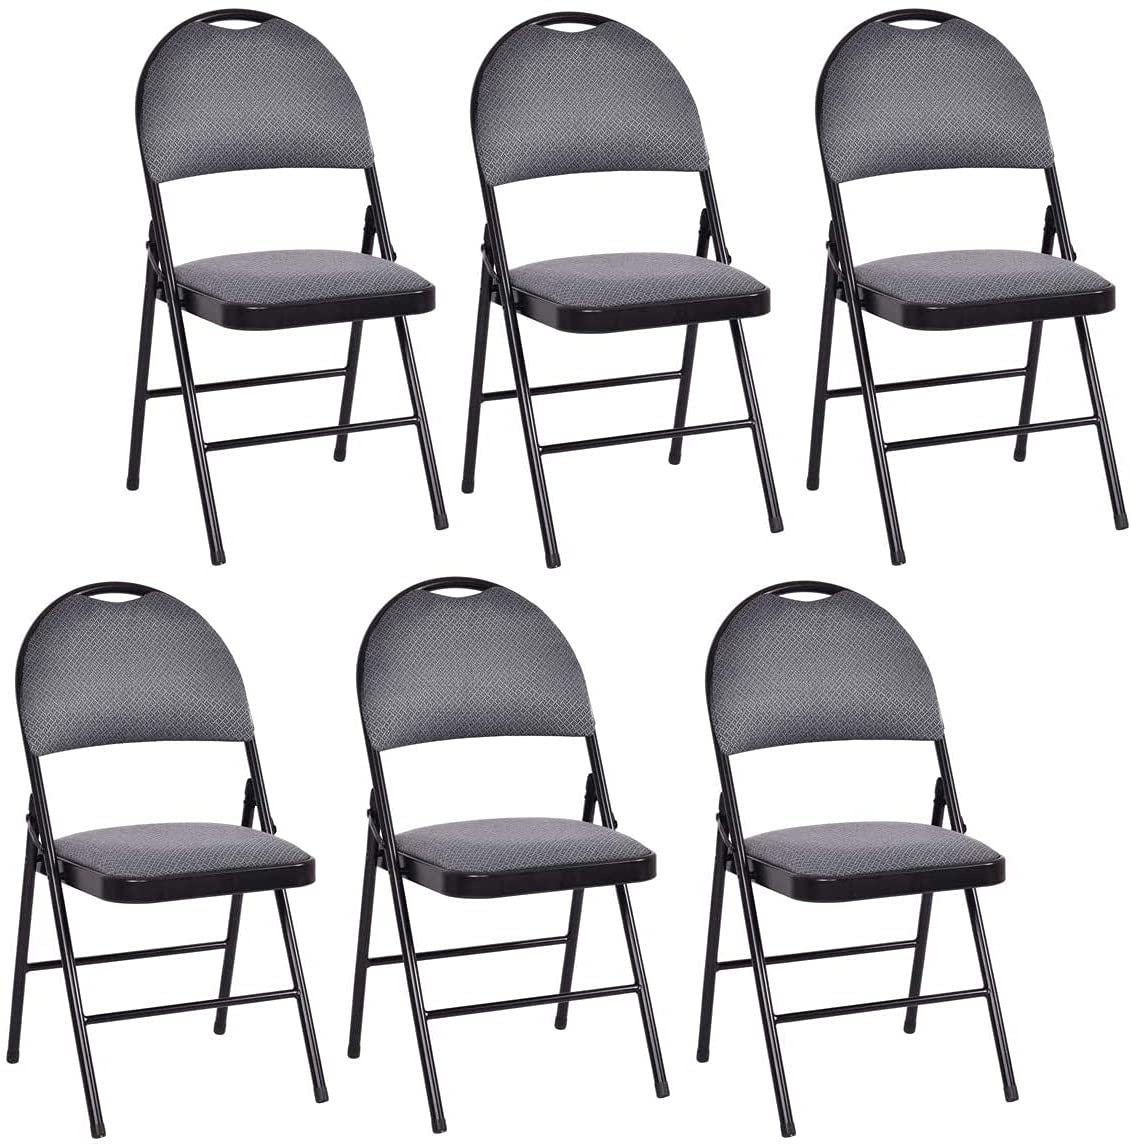 Nightcore Set of 6 Folding chairs, Upholstered chair Set, Double Hinged Lounge chair with cushioned Seat, Armless chairs, Portab